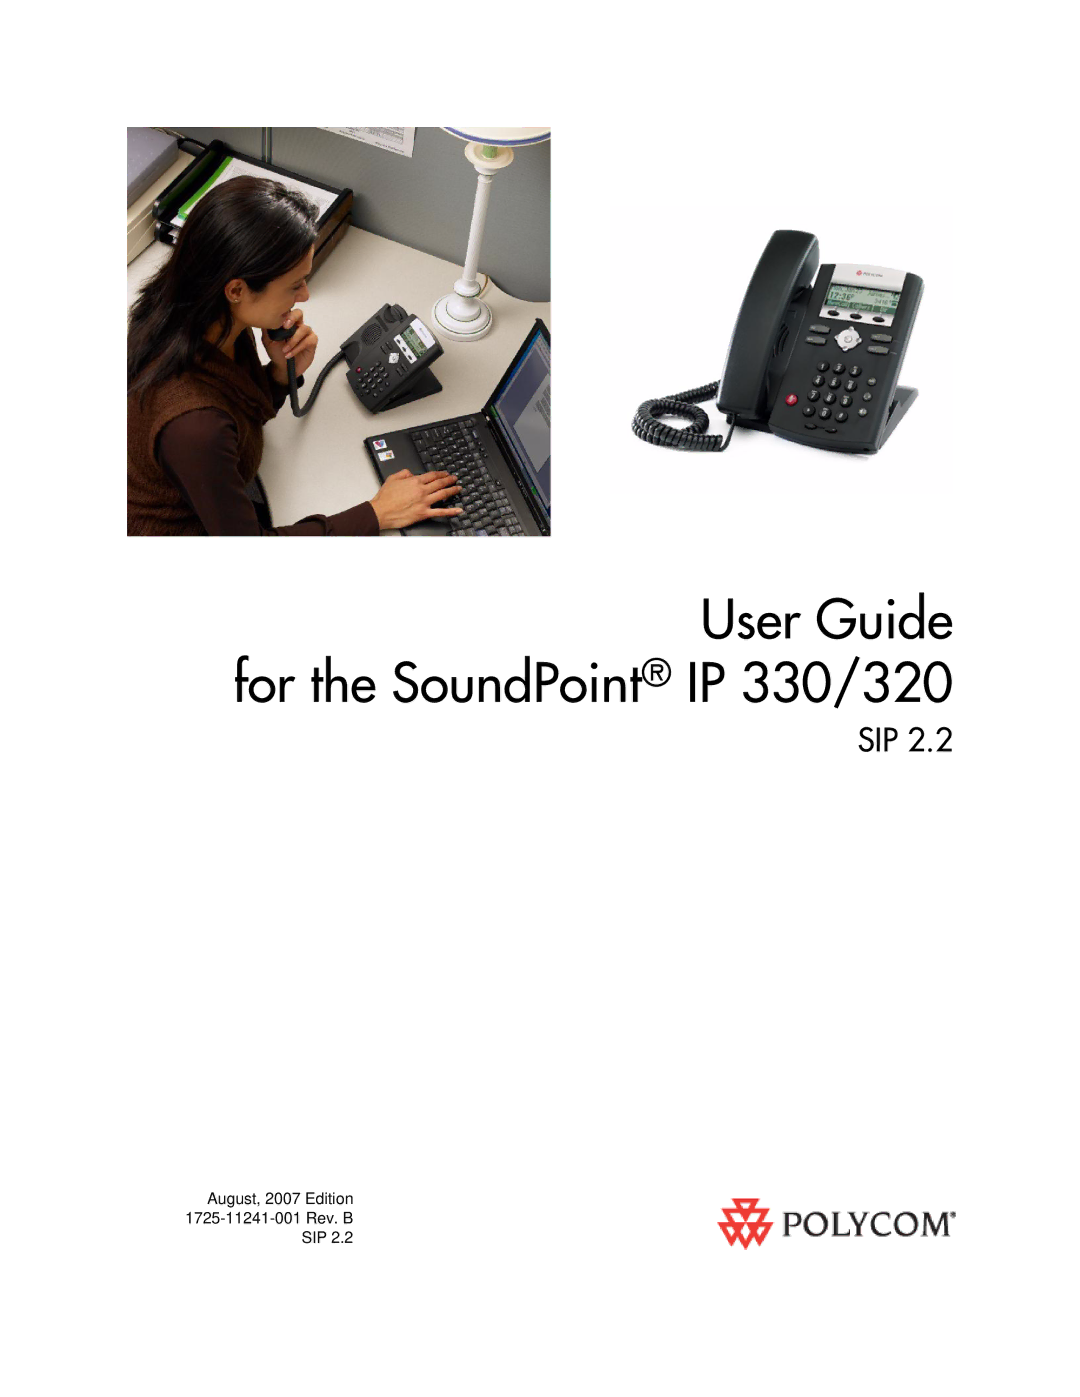 Polycom manual User Guide for the SoundPoint IP 330/320 